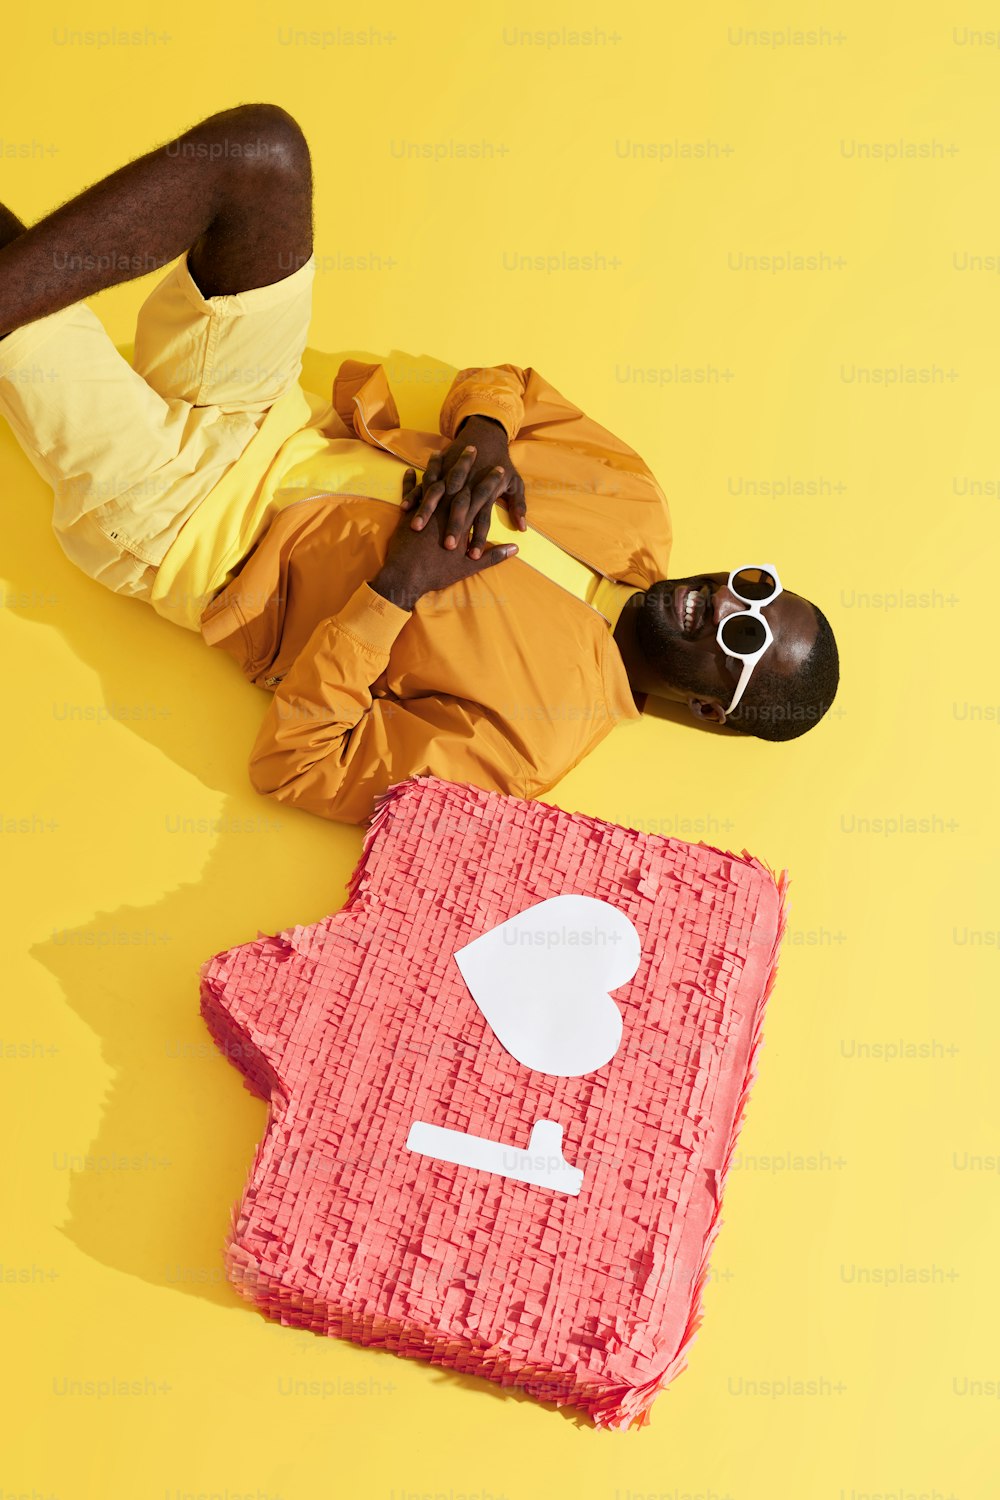 Black man lying with social media notification, like icon pinata on yellow background. Studio portrait of happy smiling male model relaxing near heart sign button